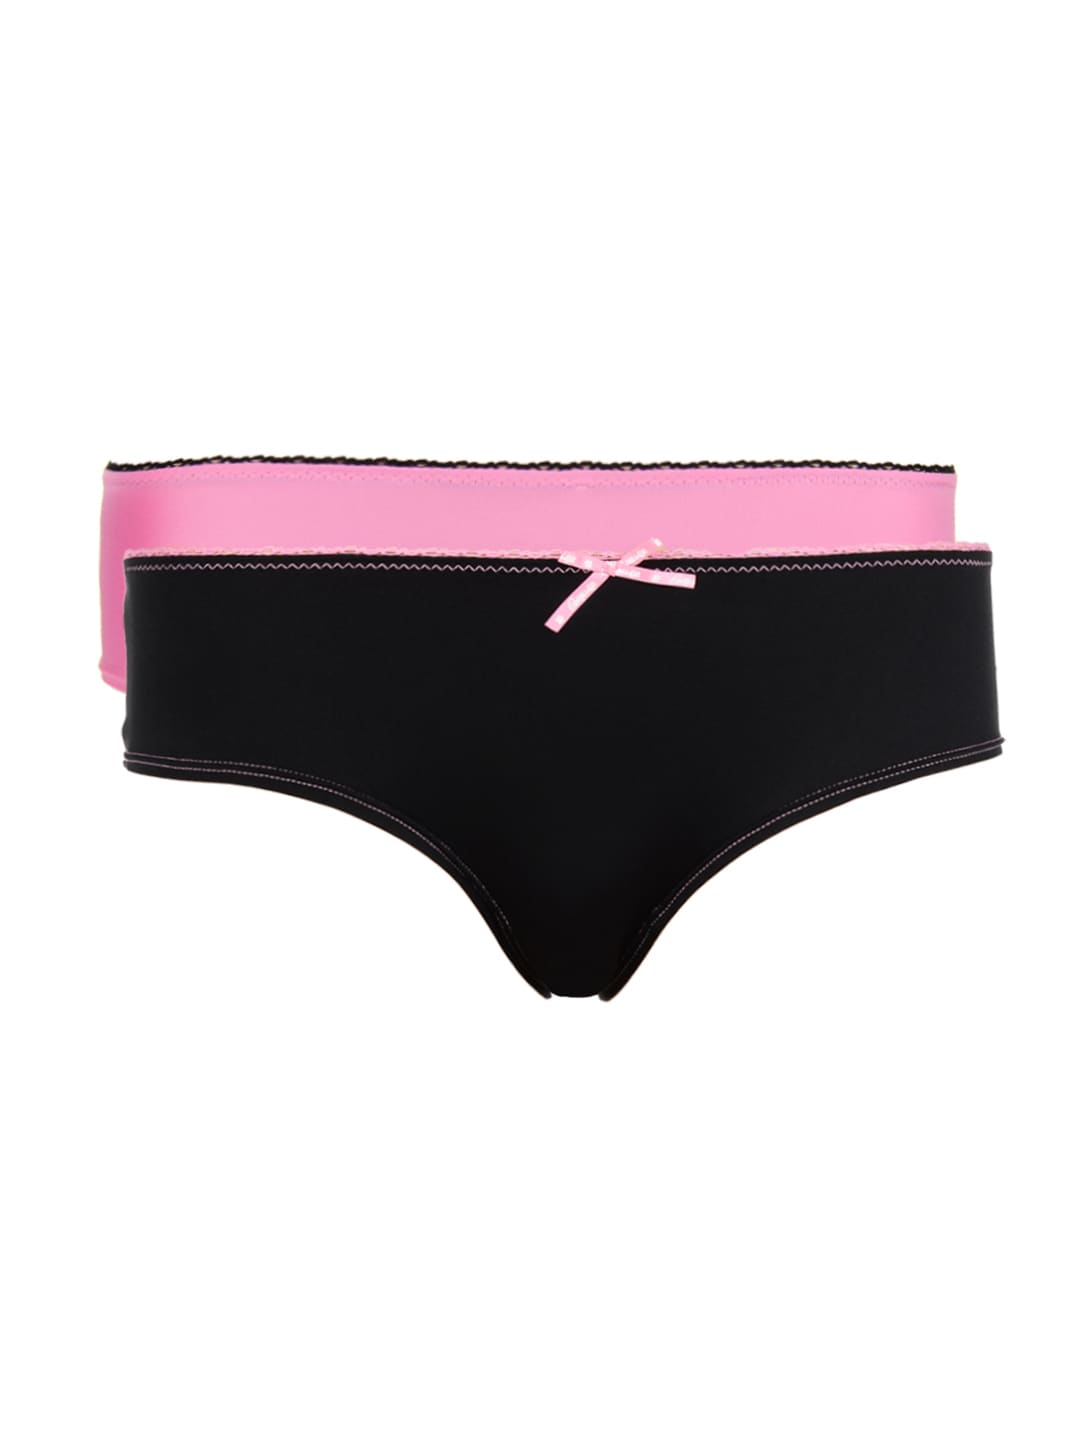 Garfield Women Black & Pink Cheeky Pack of two Hipster Briefs